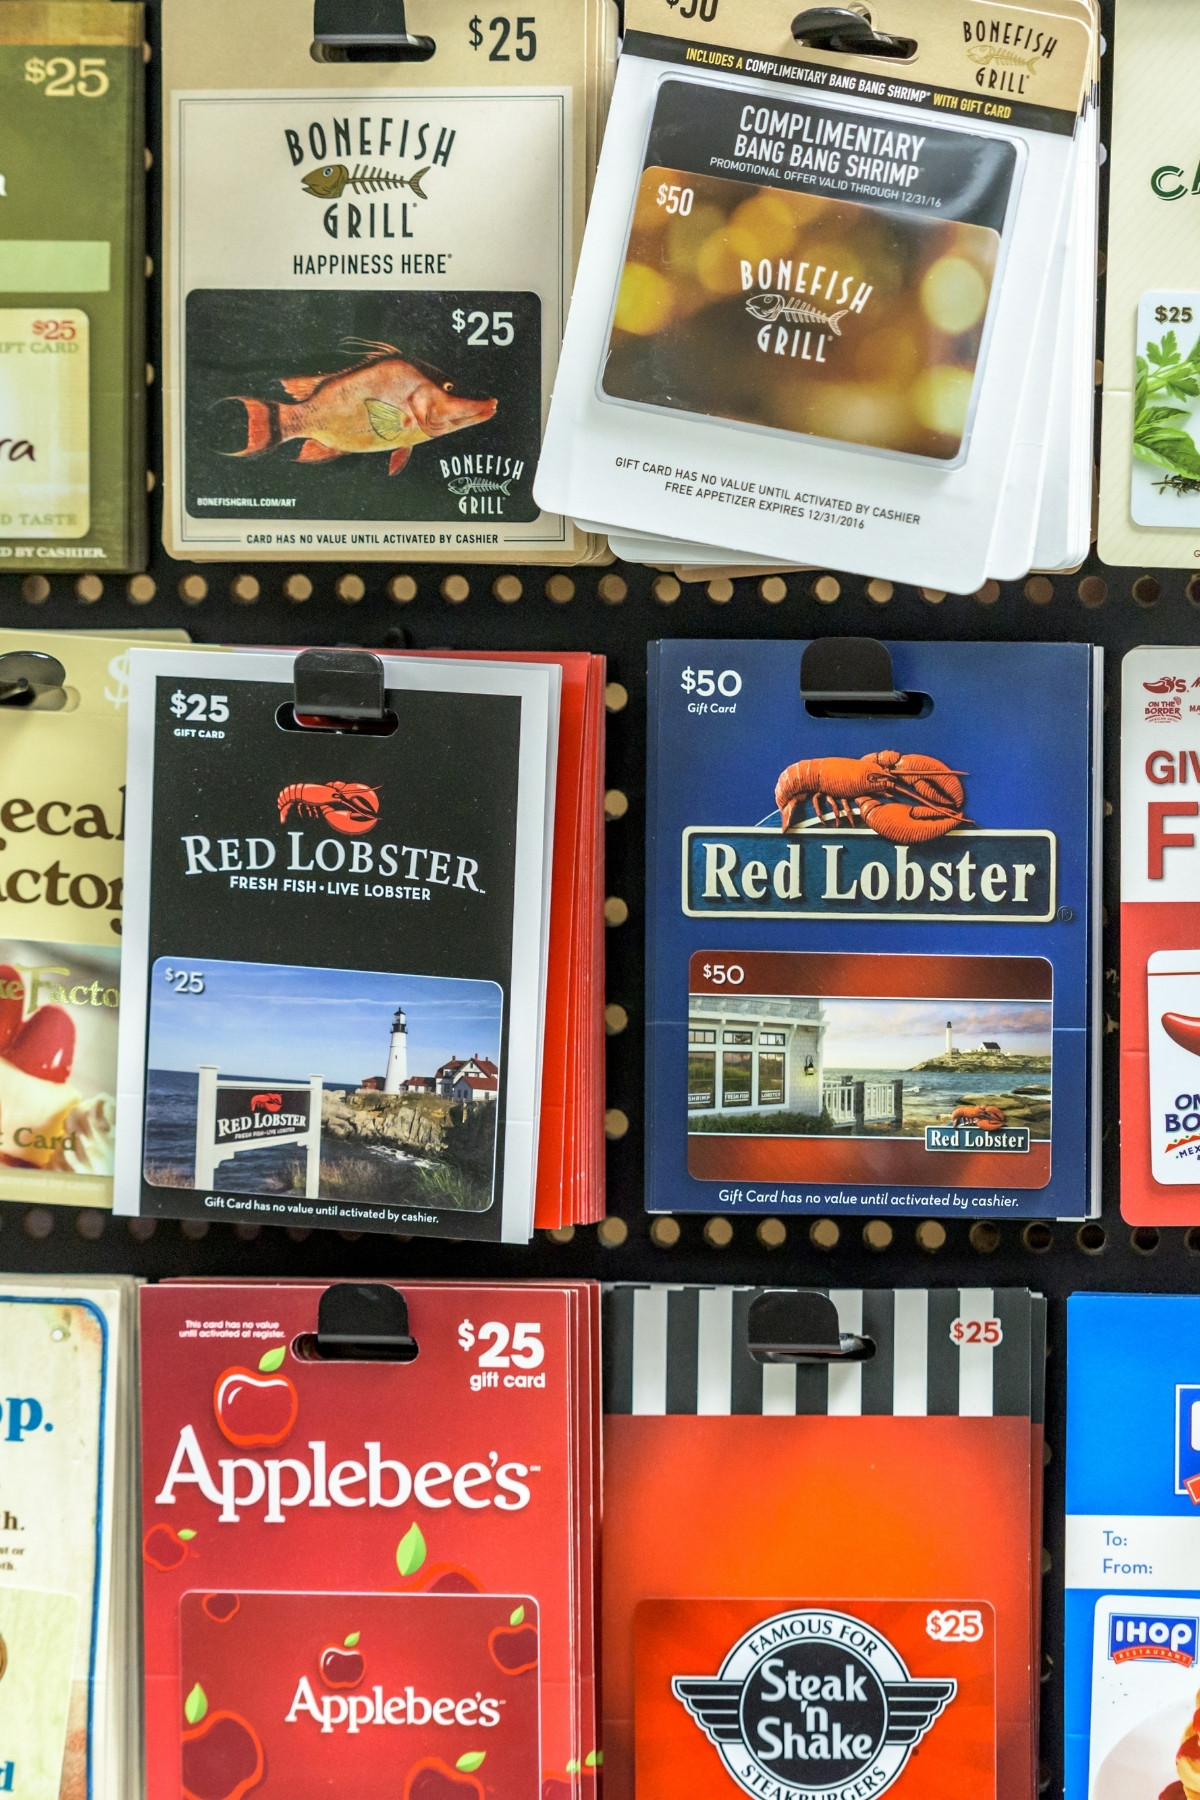 Several different gift cards on display for restaurants and stores.